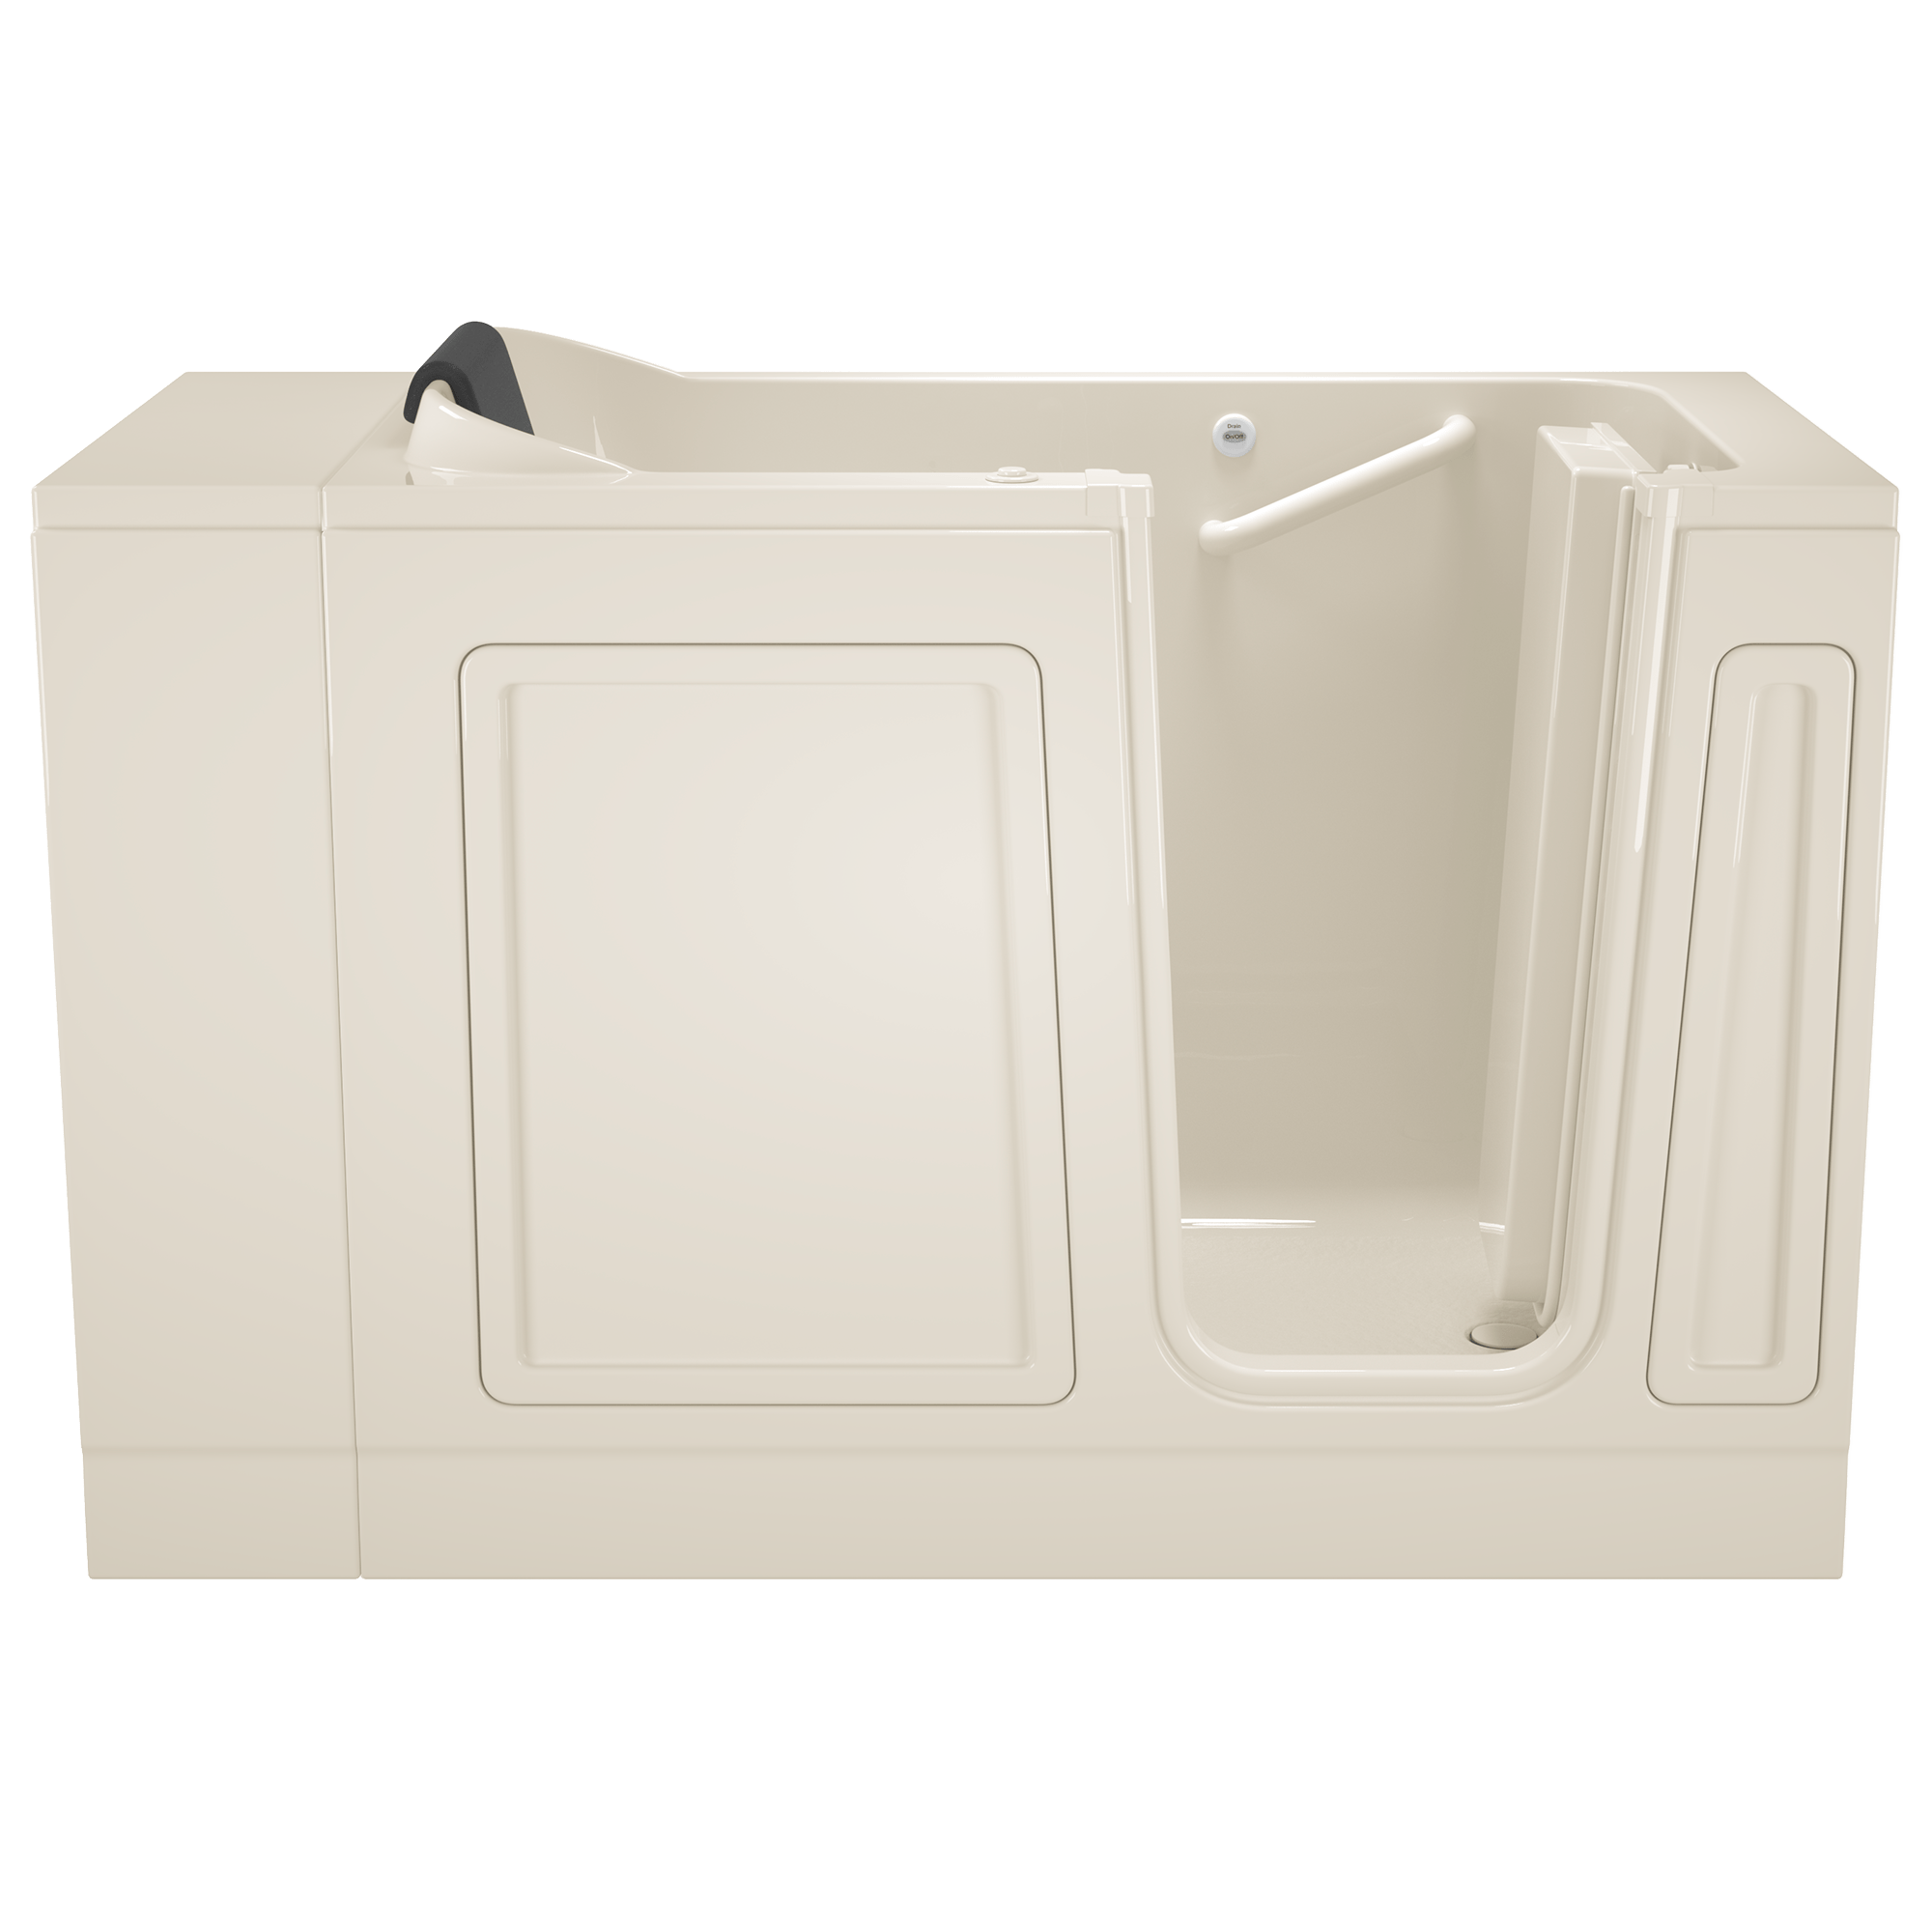 Acrylic Luxury Series 28 x 48 Inch Walk in Tub With Whirlpool System   Right Hand Drain WIB LINEN